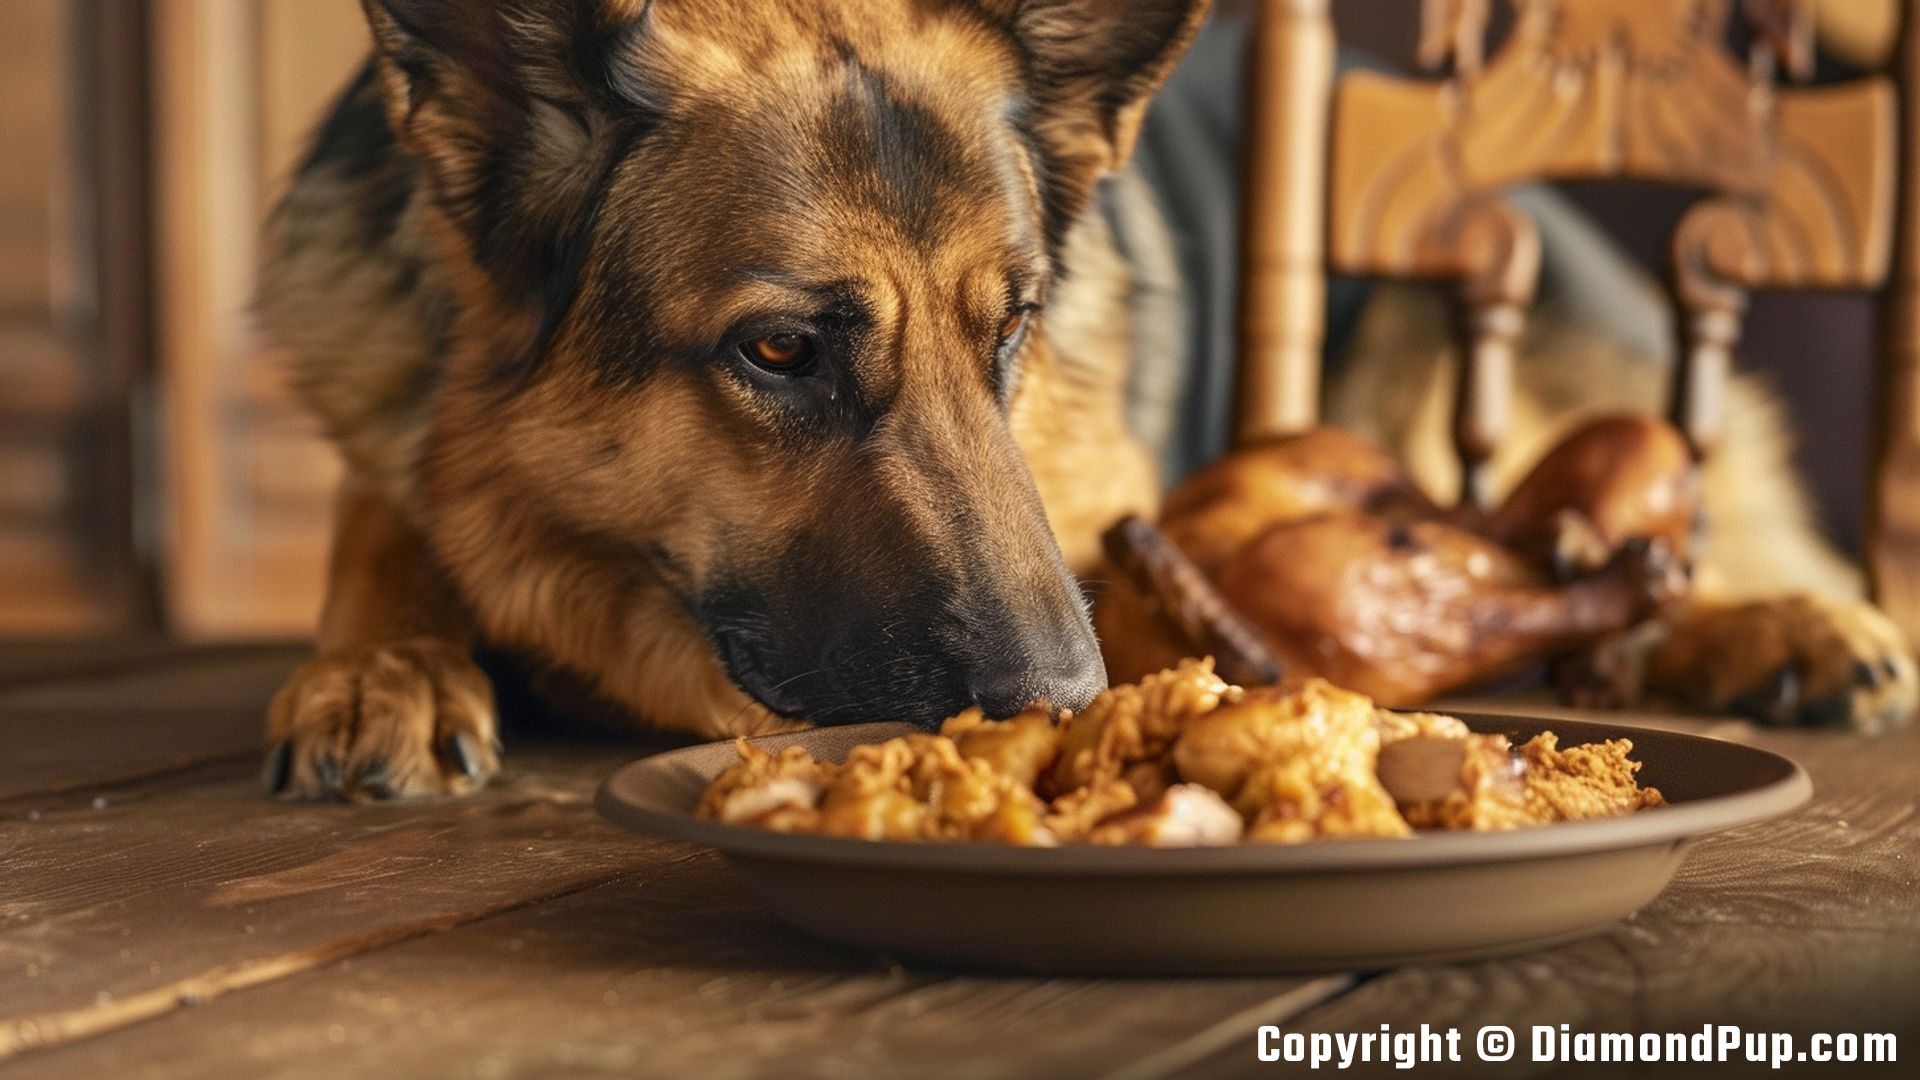 Image of an Adorable German Shepherd Snacking on Chicken